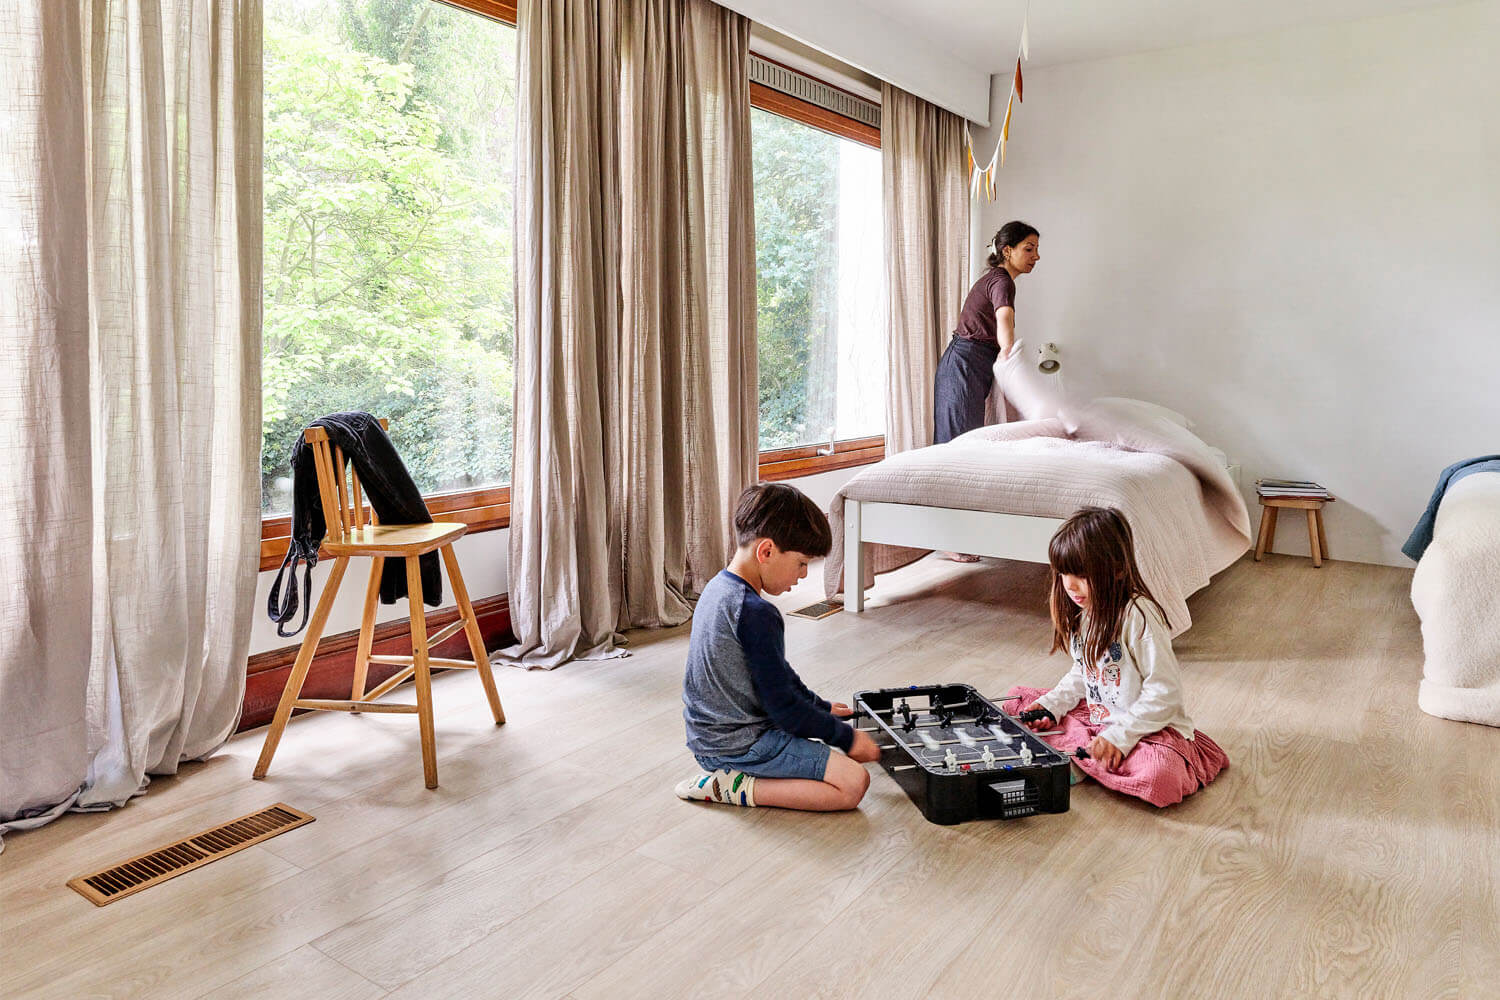 Sumeyya makes the bed in the children's bedroom while the kids play a game on the floor. This floor is the Moduleo LayRed Laurel Oak 51230 Embossed luxury vinyl floor.